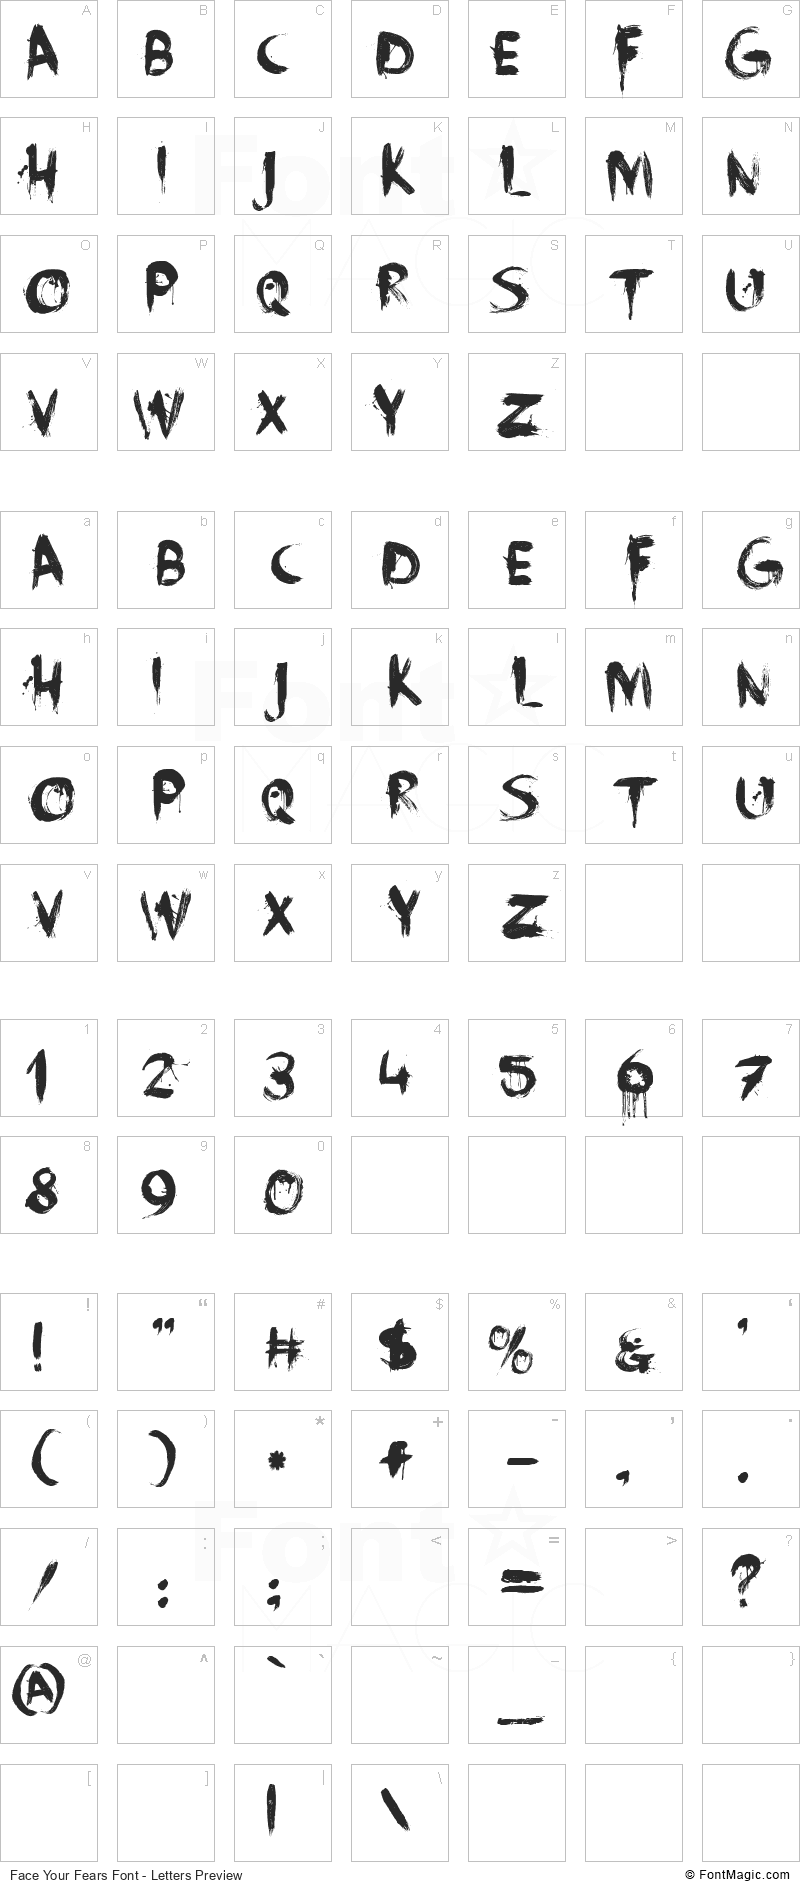 Face Your Fears Font - All Latters Preview Chart